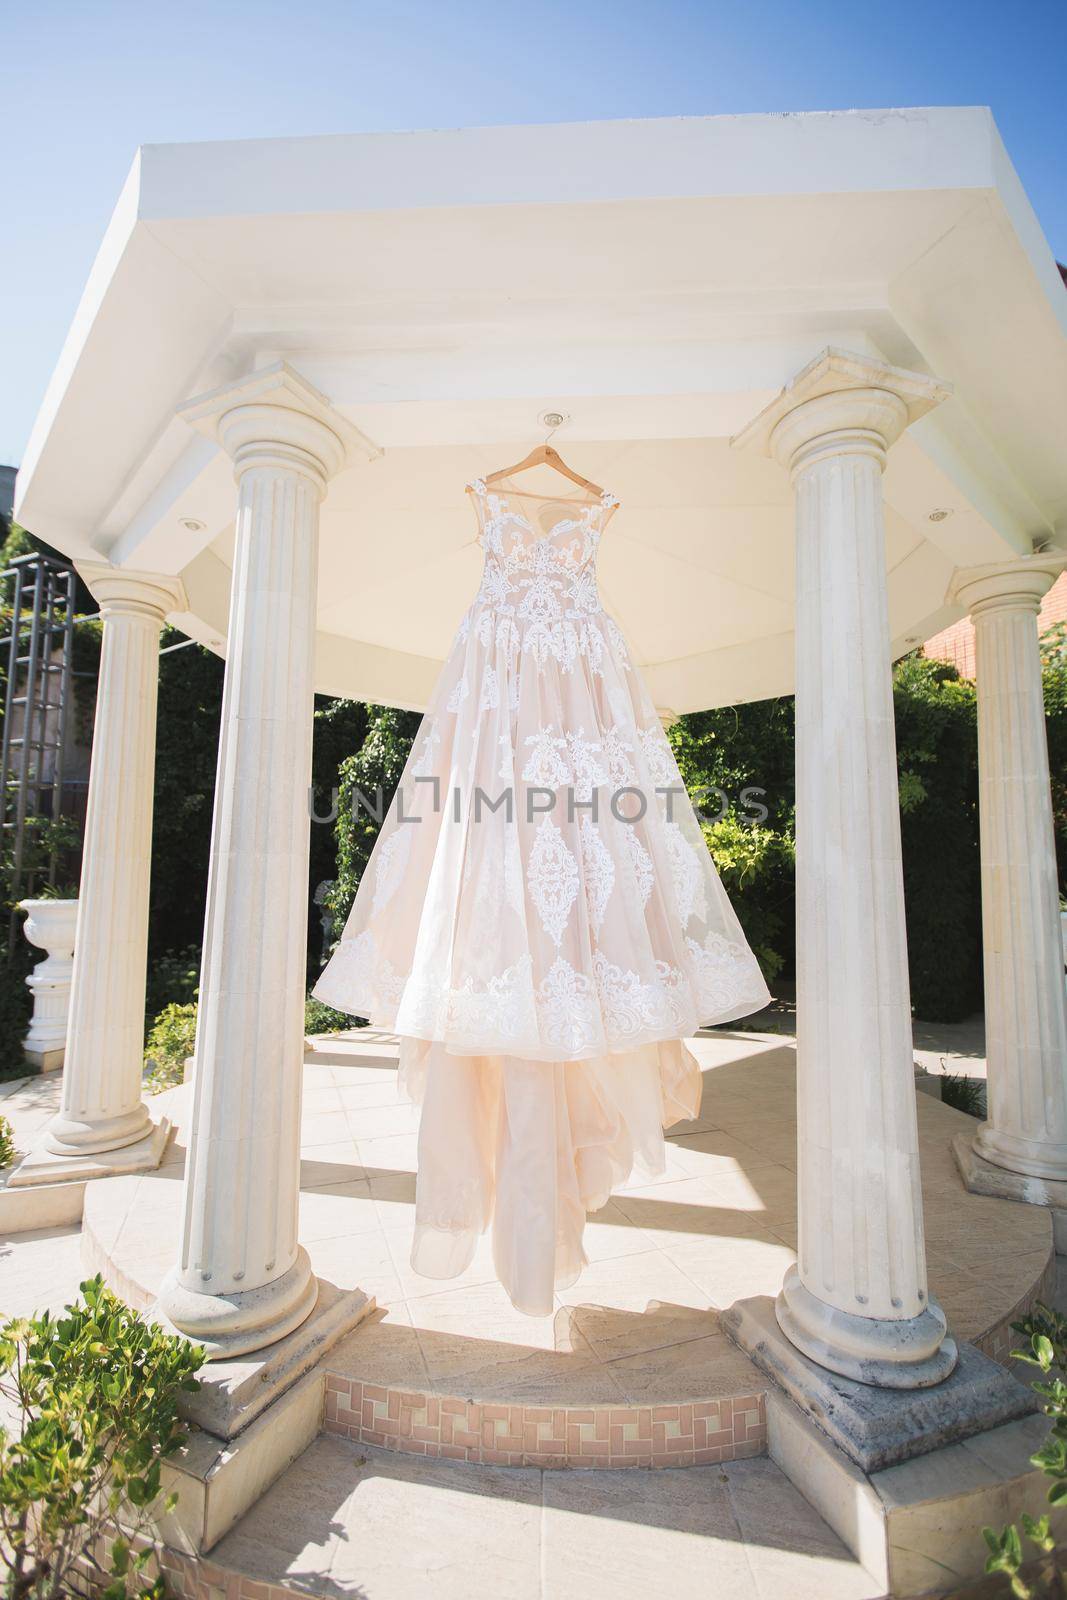 The wedding dress is hanging in a beautiful white gazebo by StudioPeace